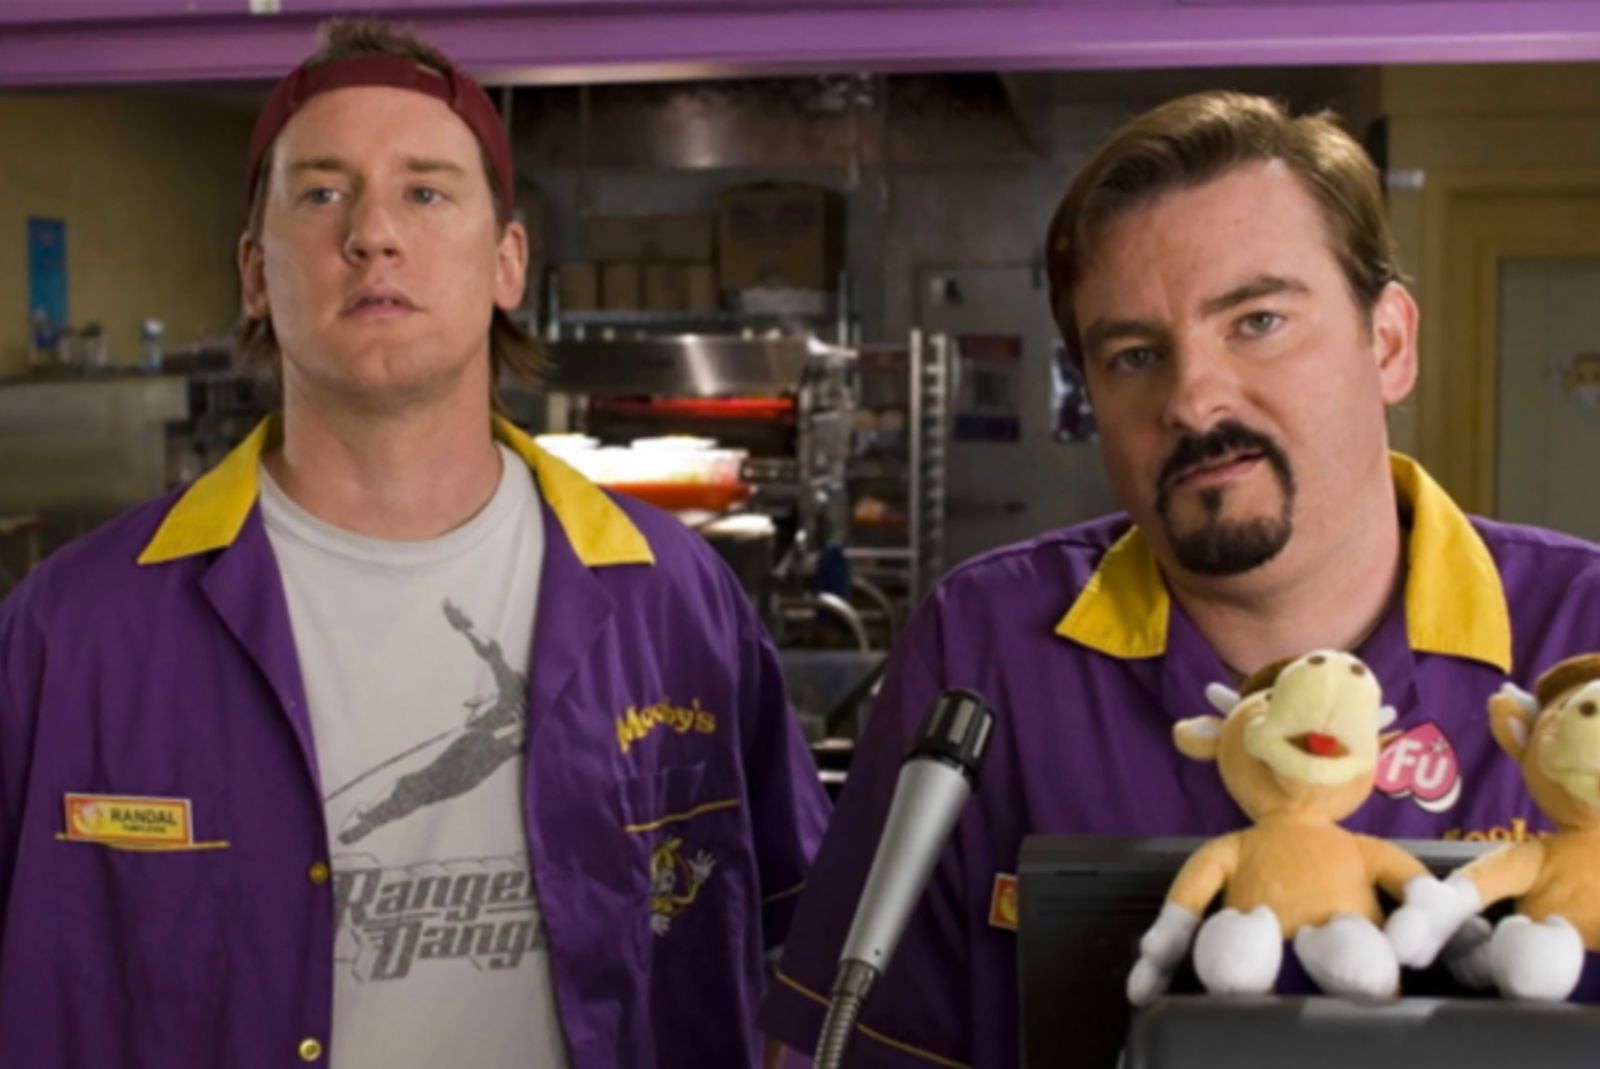 View Askewniverse movie order: Watch every Kevin Smith movie in chronological order photo 8